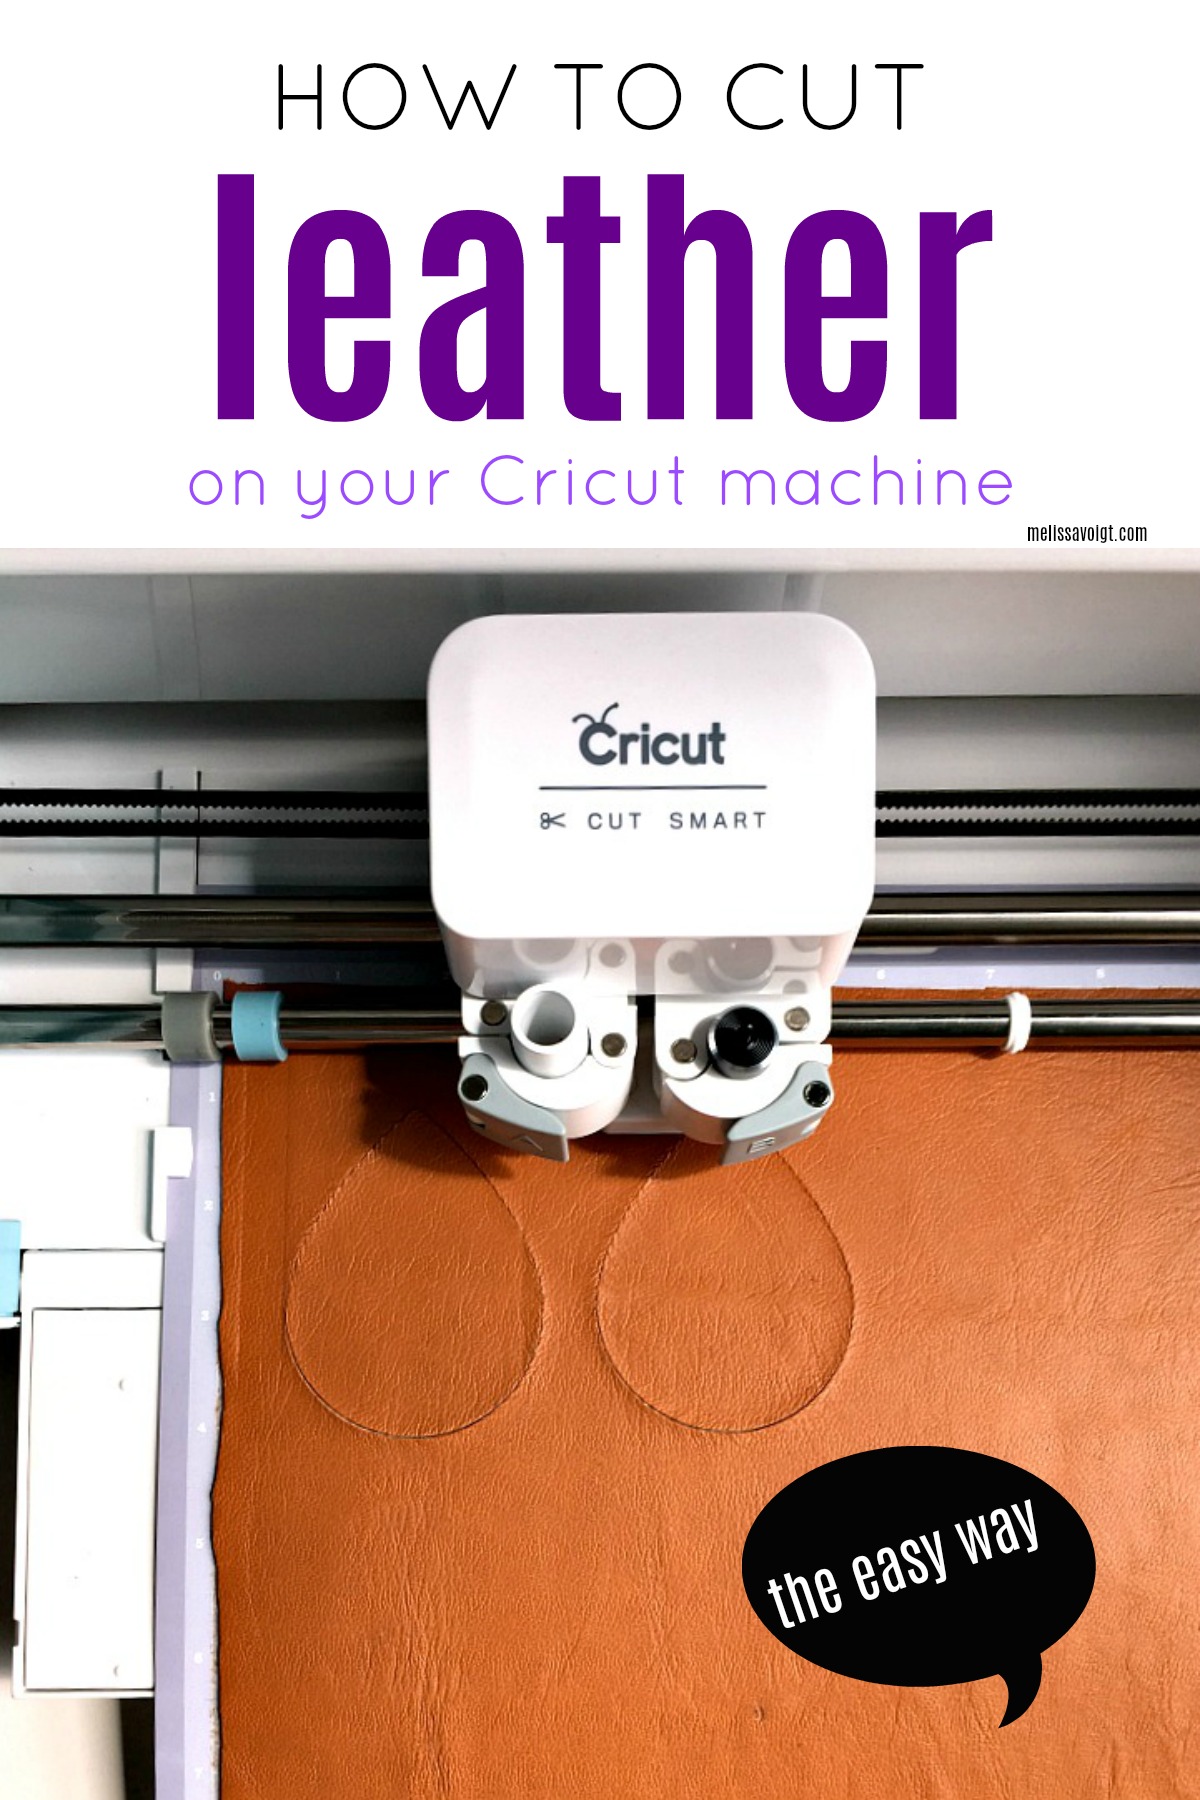 HOW TO CUT LEATHER ON YOUR CRICUT THE EASY WAY! — melissa voigt